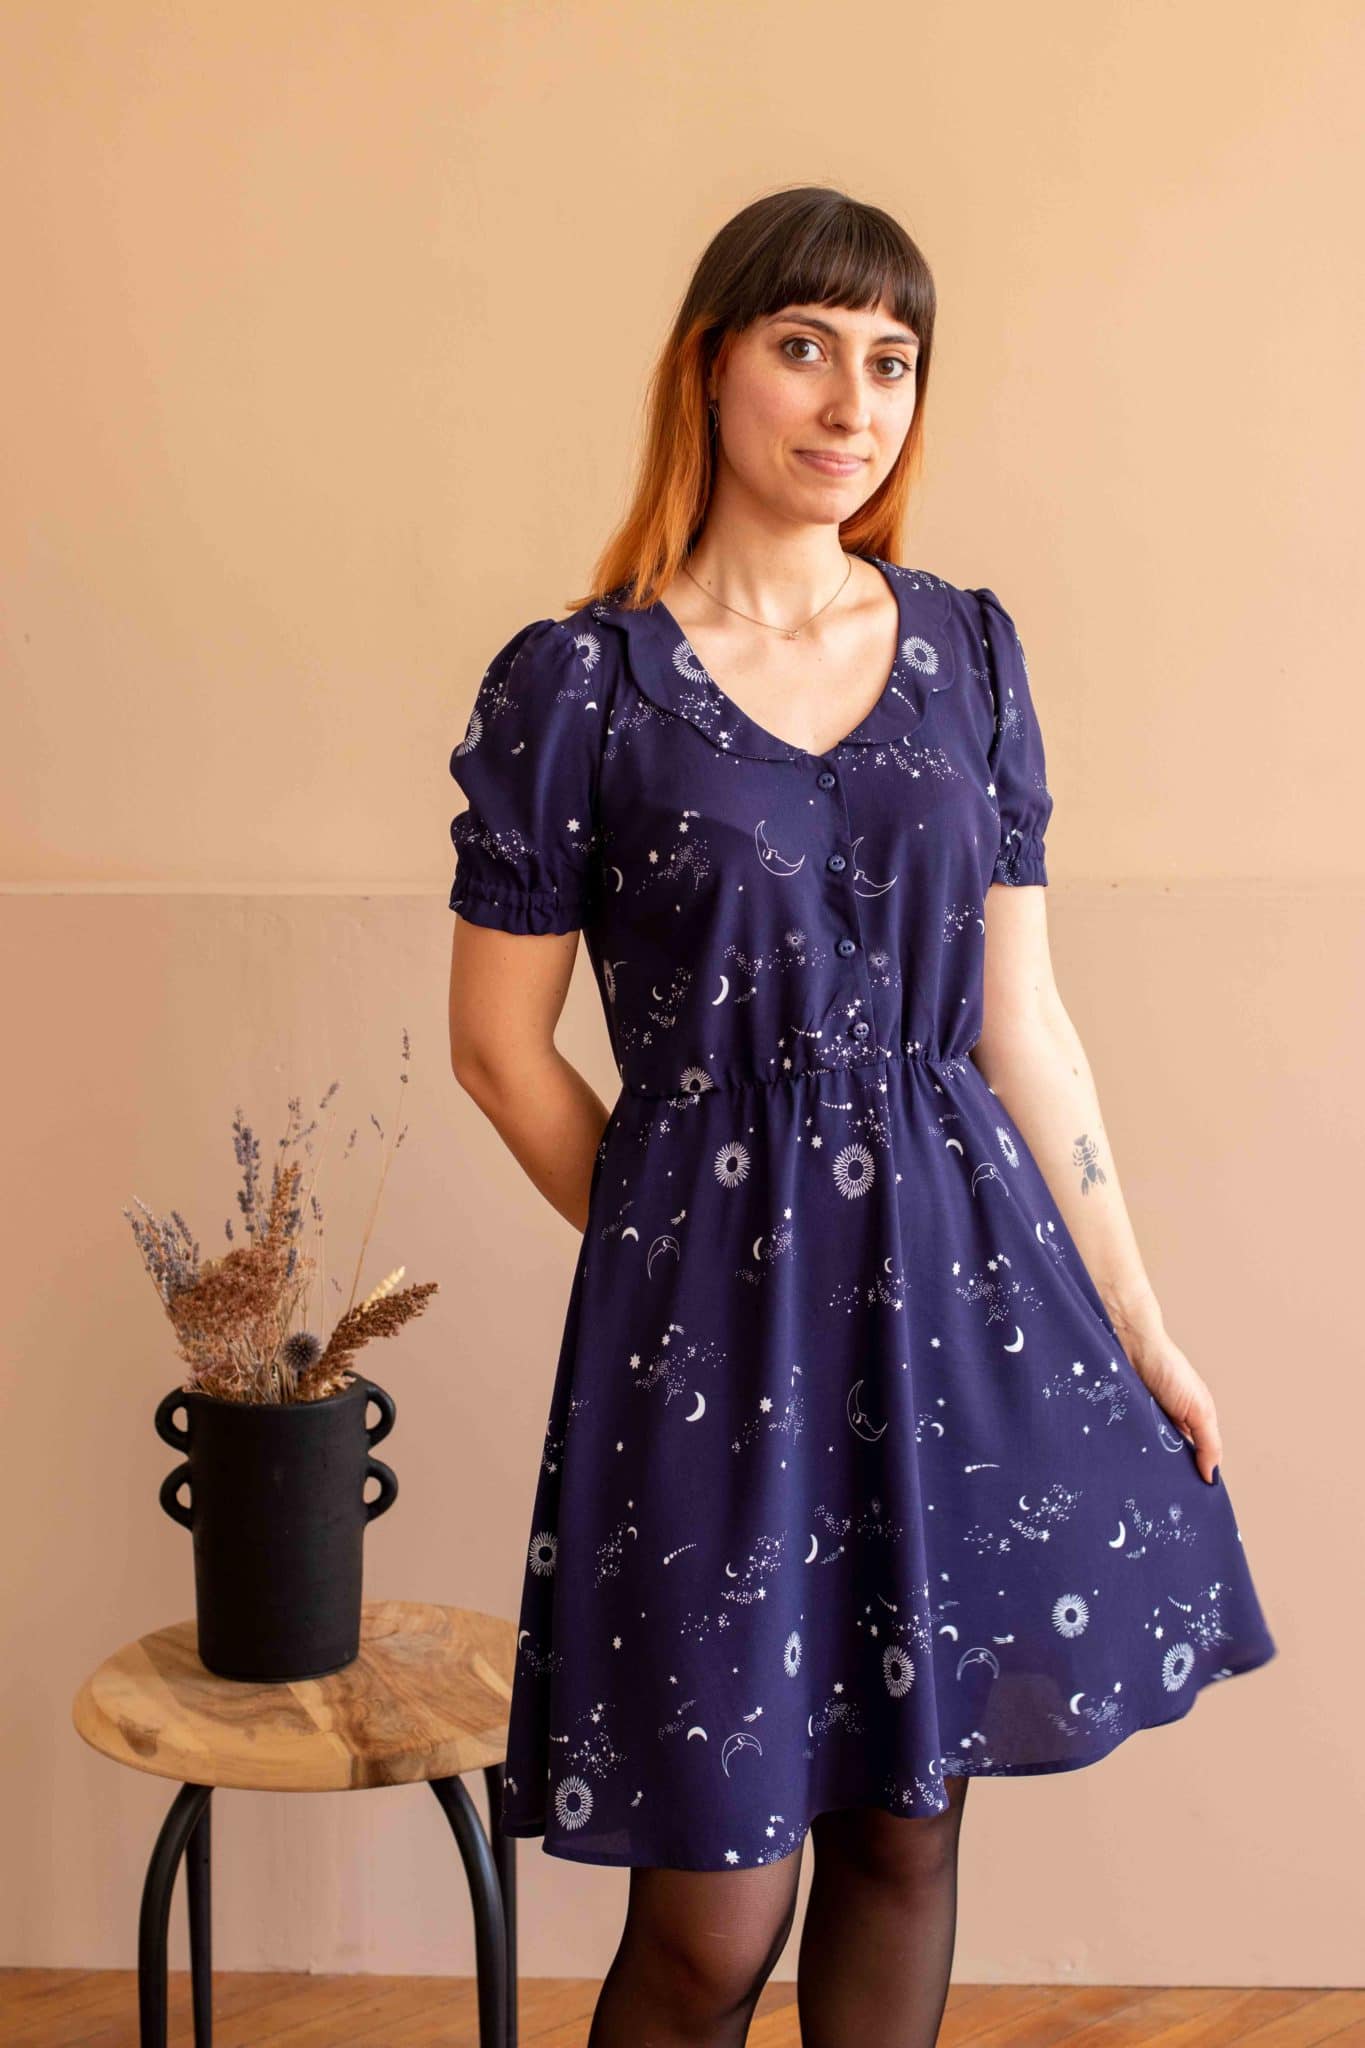 Sewing Kit - Lise Tailor Comete Dress & Blouse in Midnight Blooms